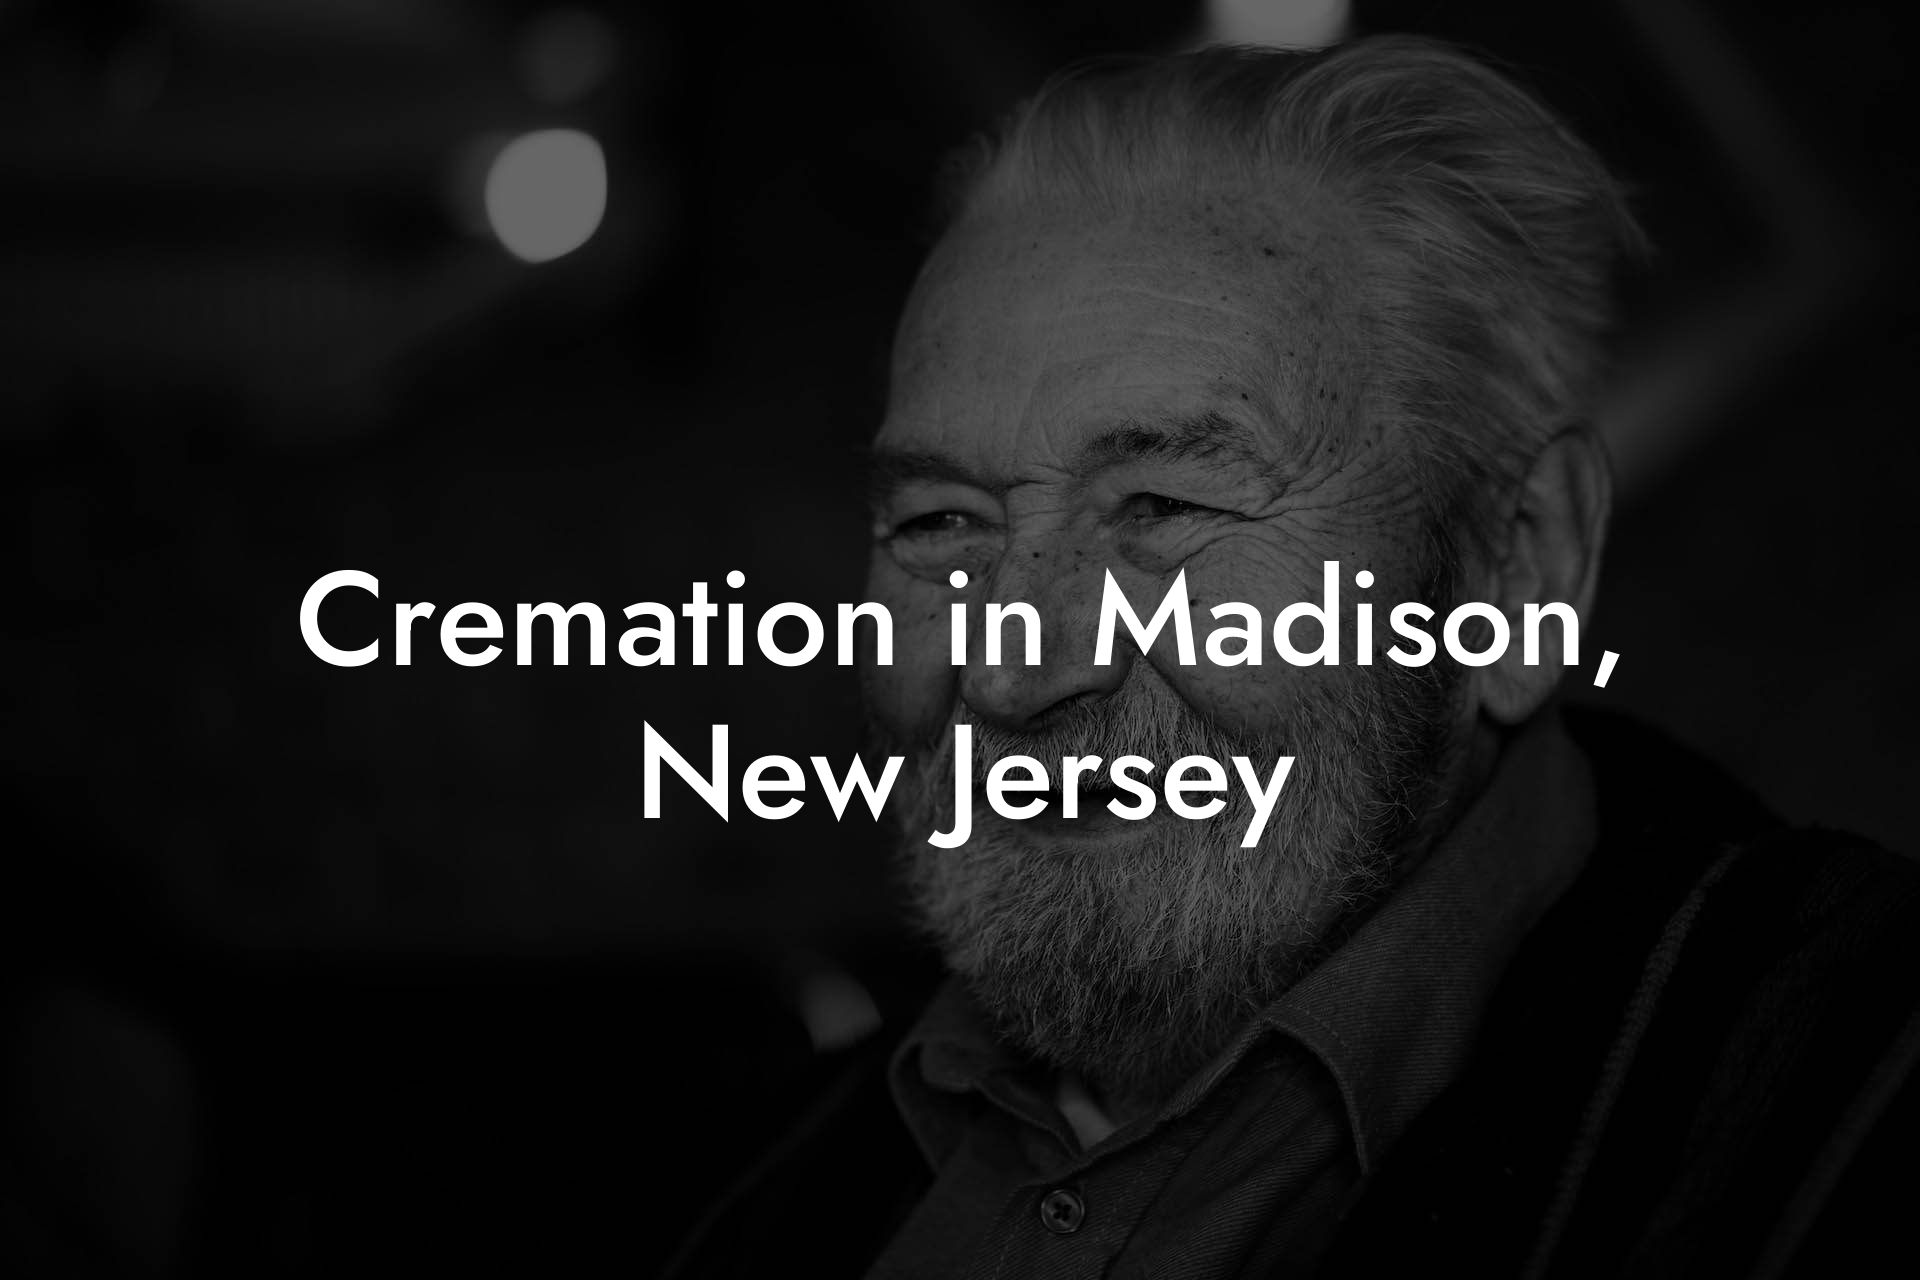 Cremation in Madison, New Jersey